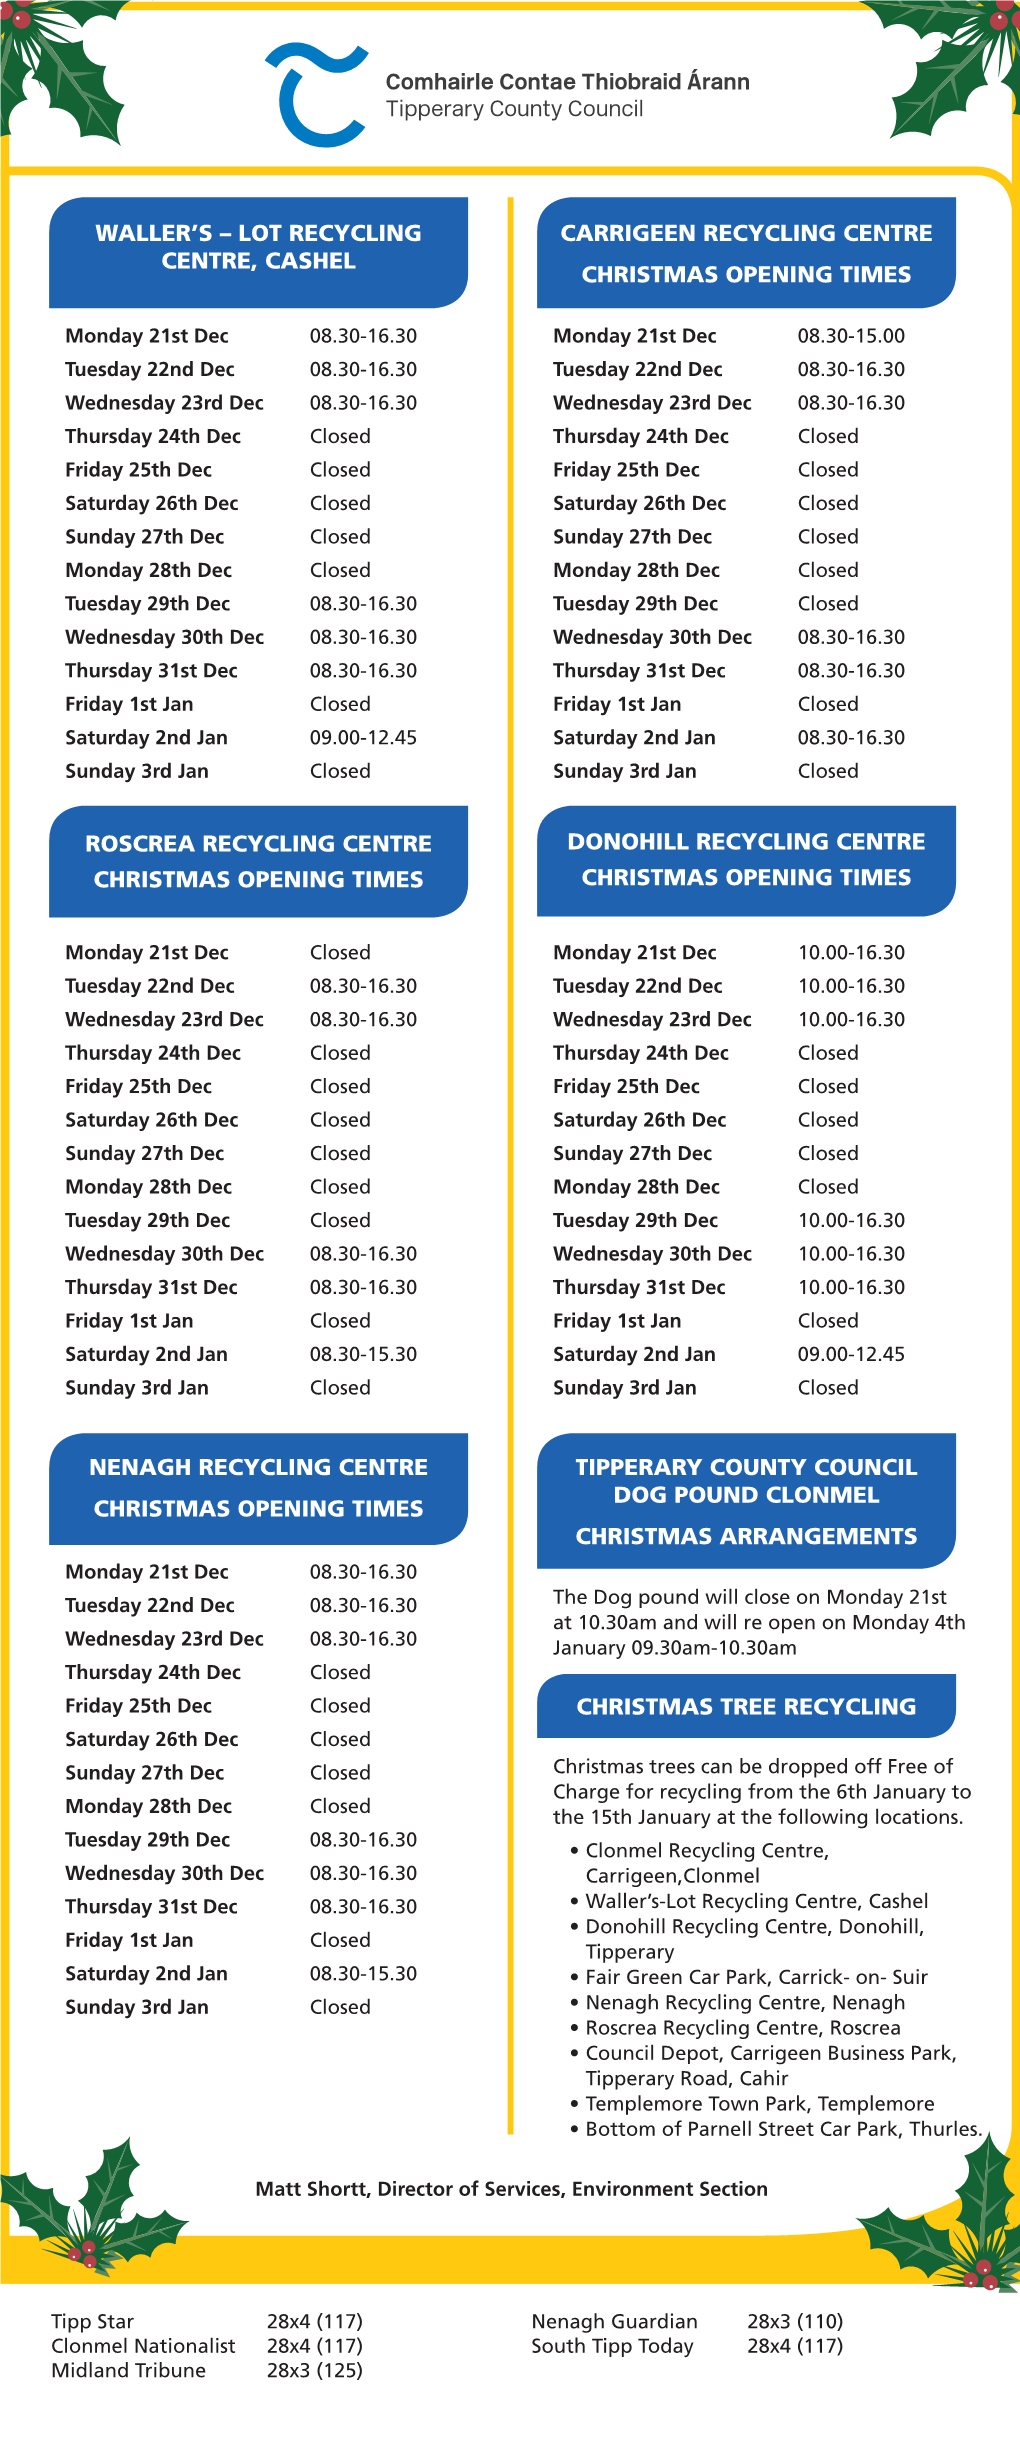 Carrigeen Recycling Centre Christmas Opening Times